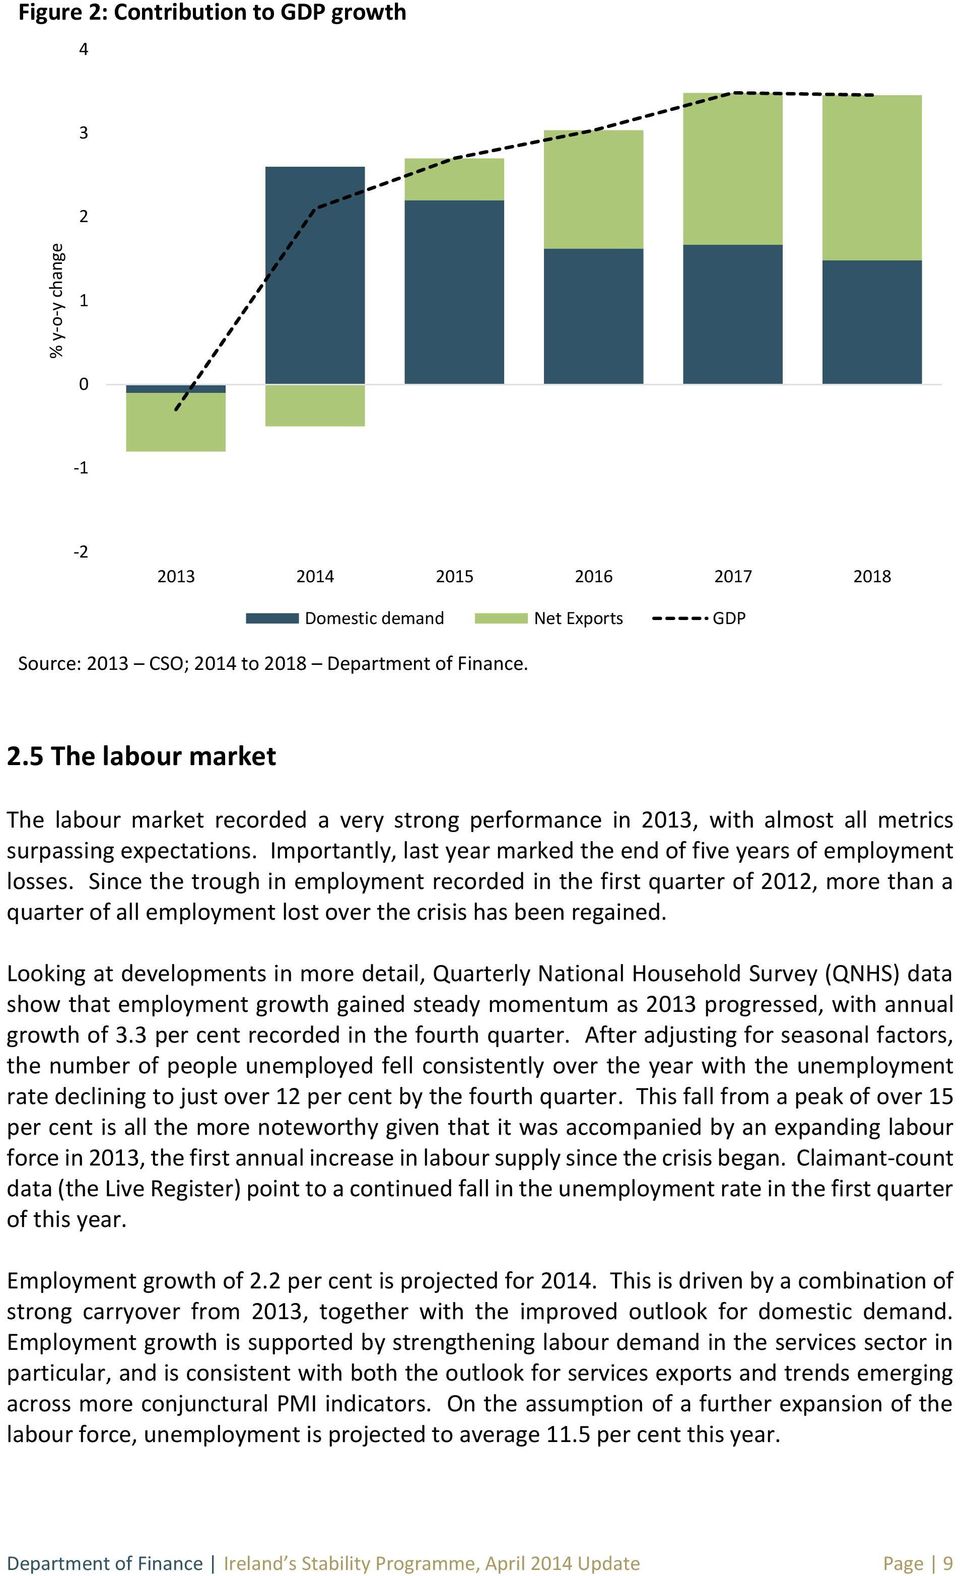 Since the trough in employment recorded in the first quarter of 2012, more than a quarter of all employment lost over the crisis has been regained.